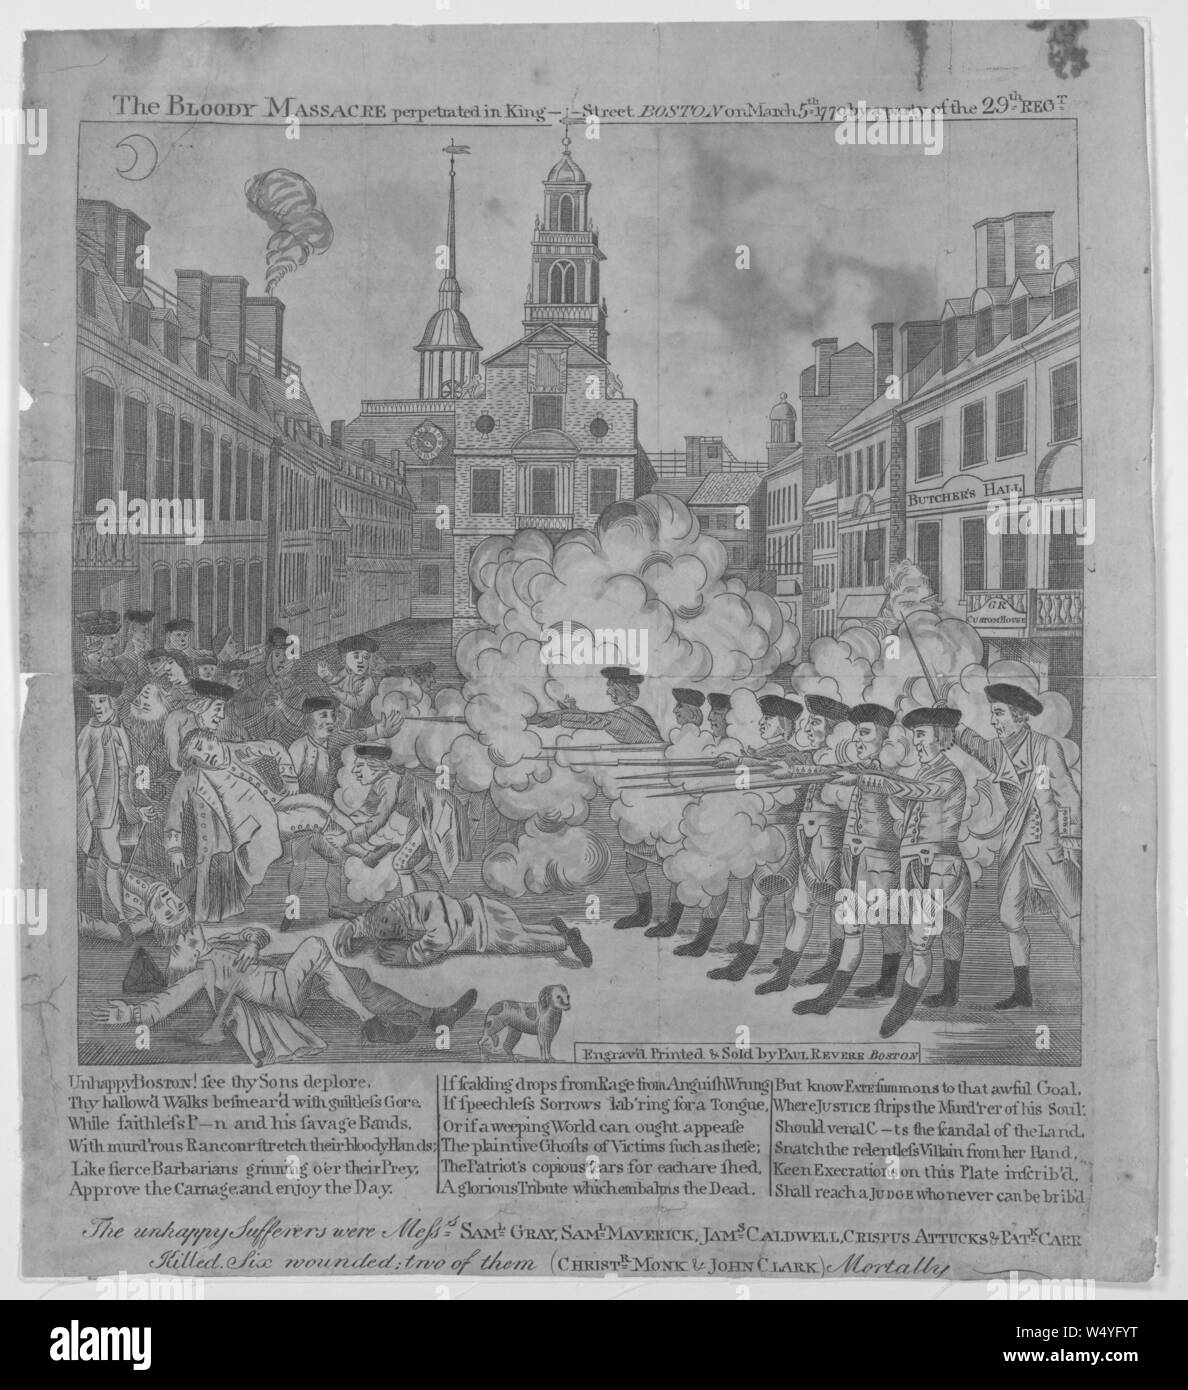 Engraving of the Boston Massacre perpetrated in King-Street, Boston, Massachusetts, by Paul Revere, 1832. From the New York Public Library. () Stock Photo